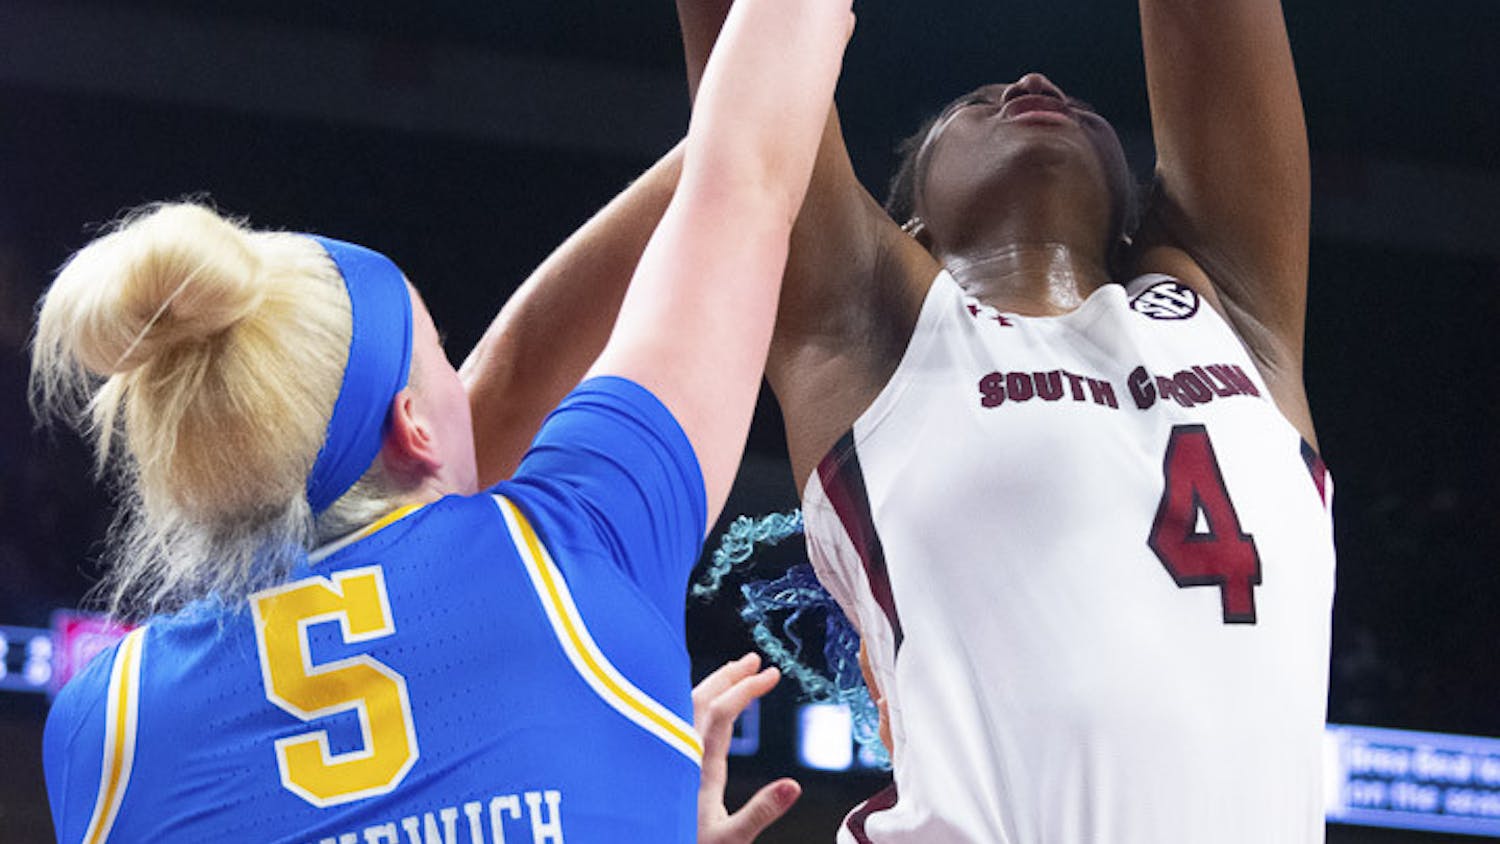 Senior forward Aliyah Boston goes in for a point during South Carolina's matchup with UCLA on Nov. 29, 2022. The Gamecocks beat the Bruins 73-64.